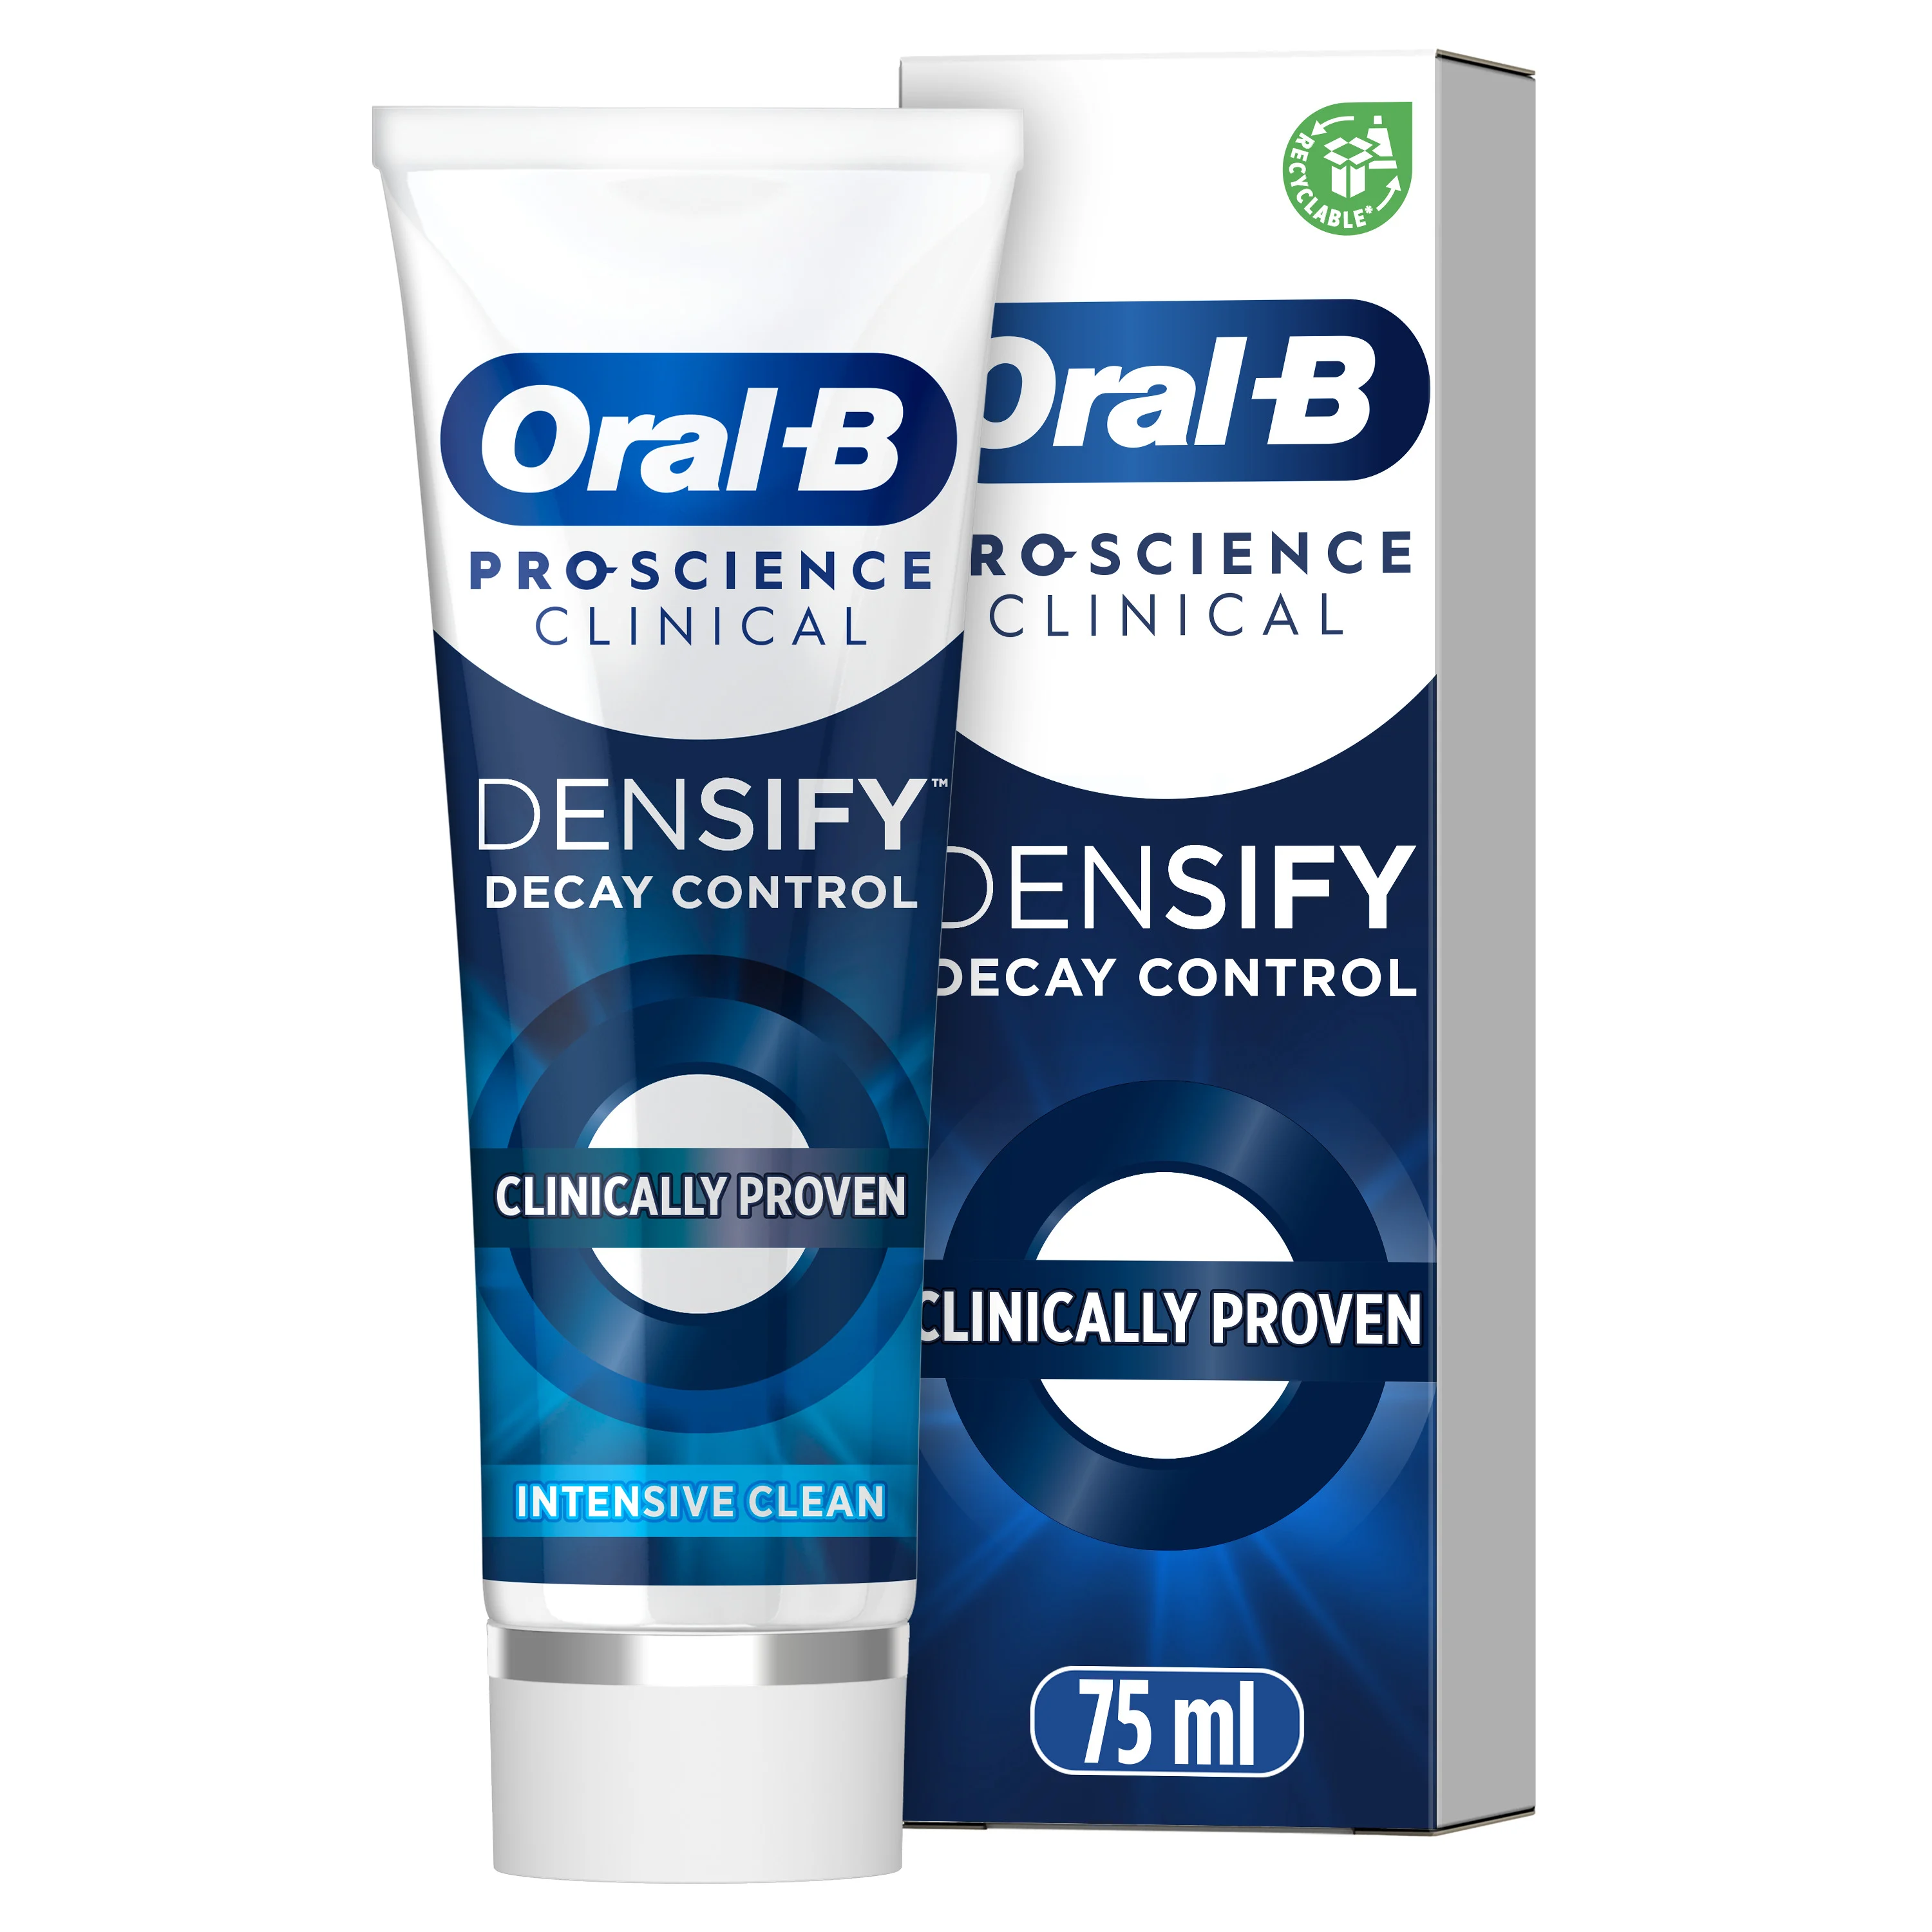 Oral-B Pro-Science Clinical Densify Decay Control Intensive Clean Tannkrem - Main 